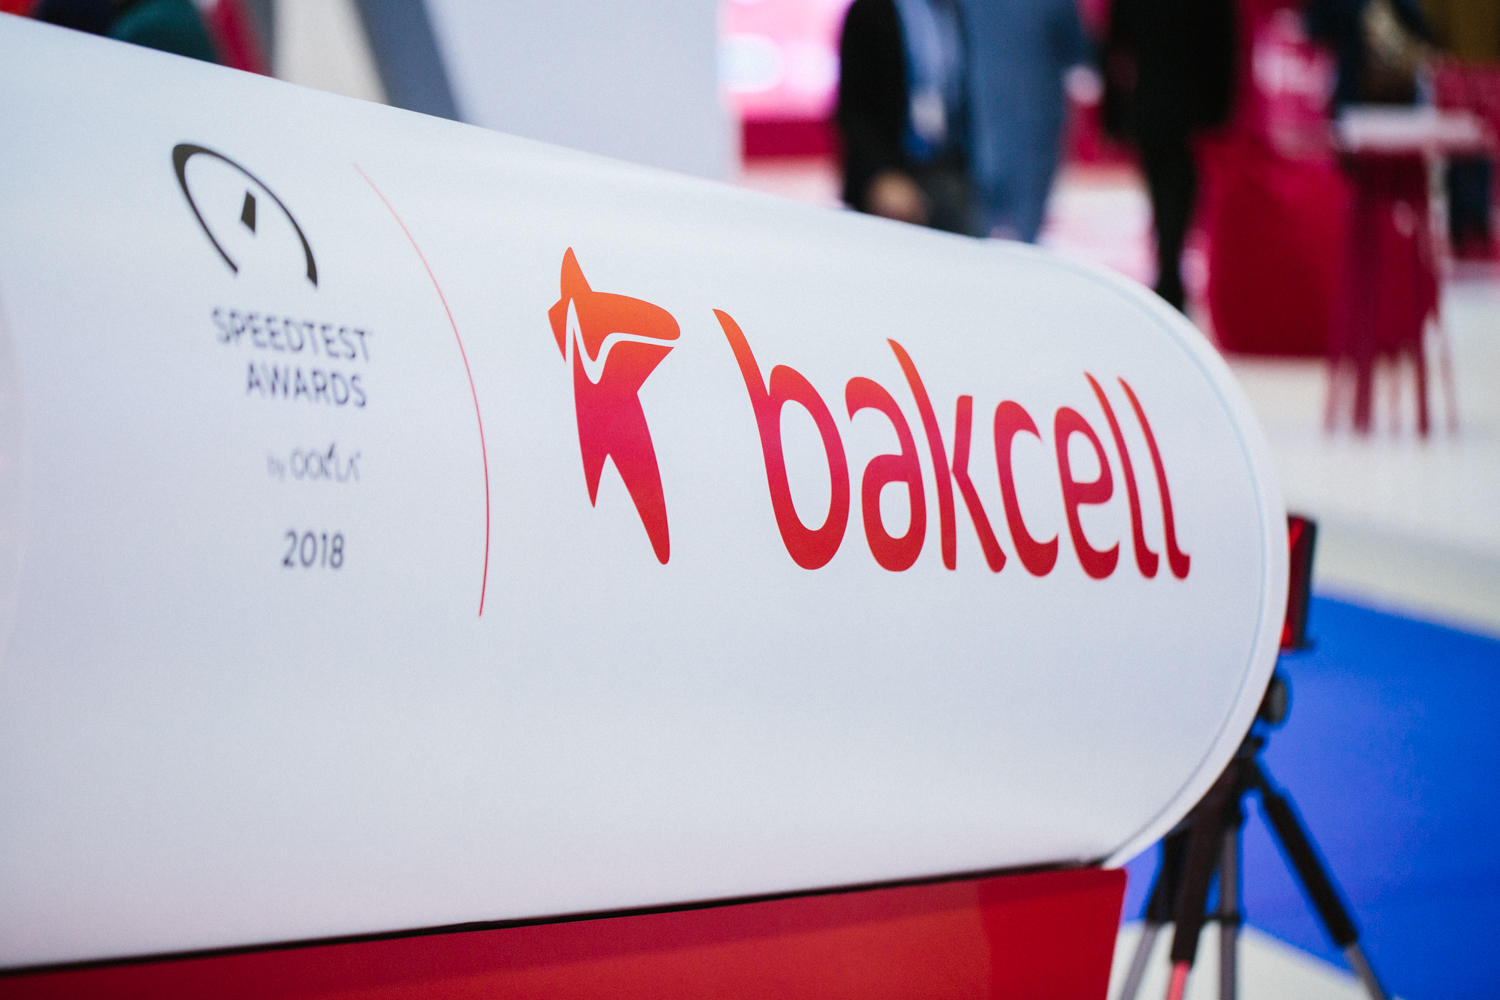 Bakcell at “Bakutel-2018” exhibition: innovations, entertainment and gifts (PHOTO)